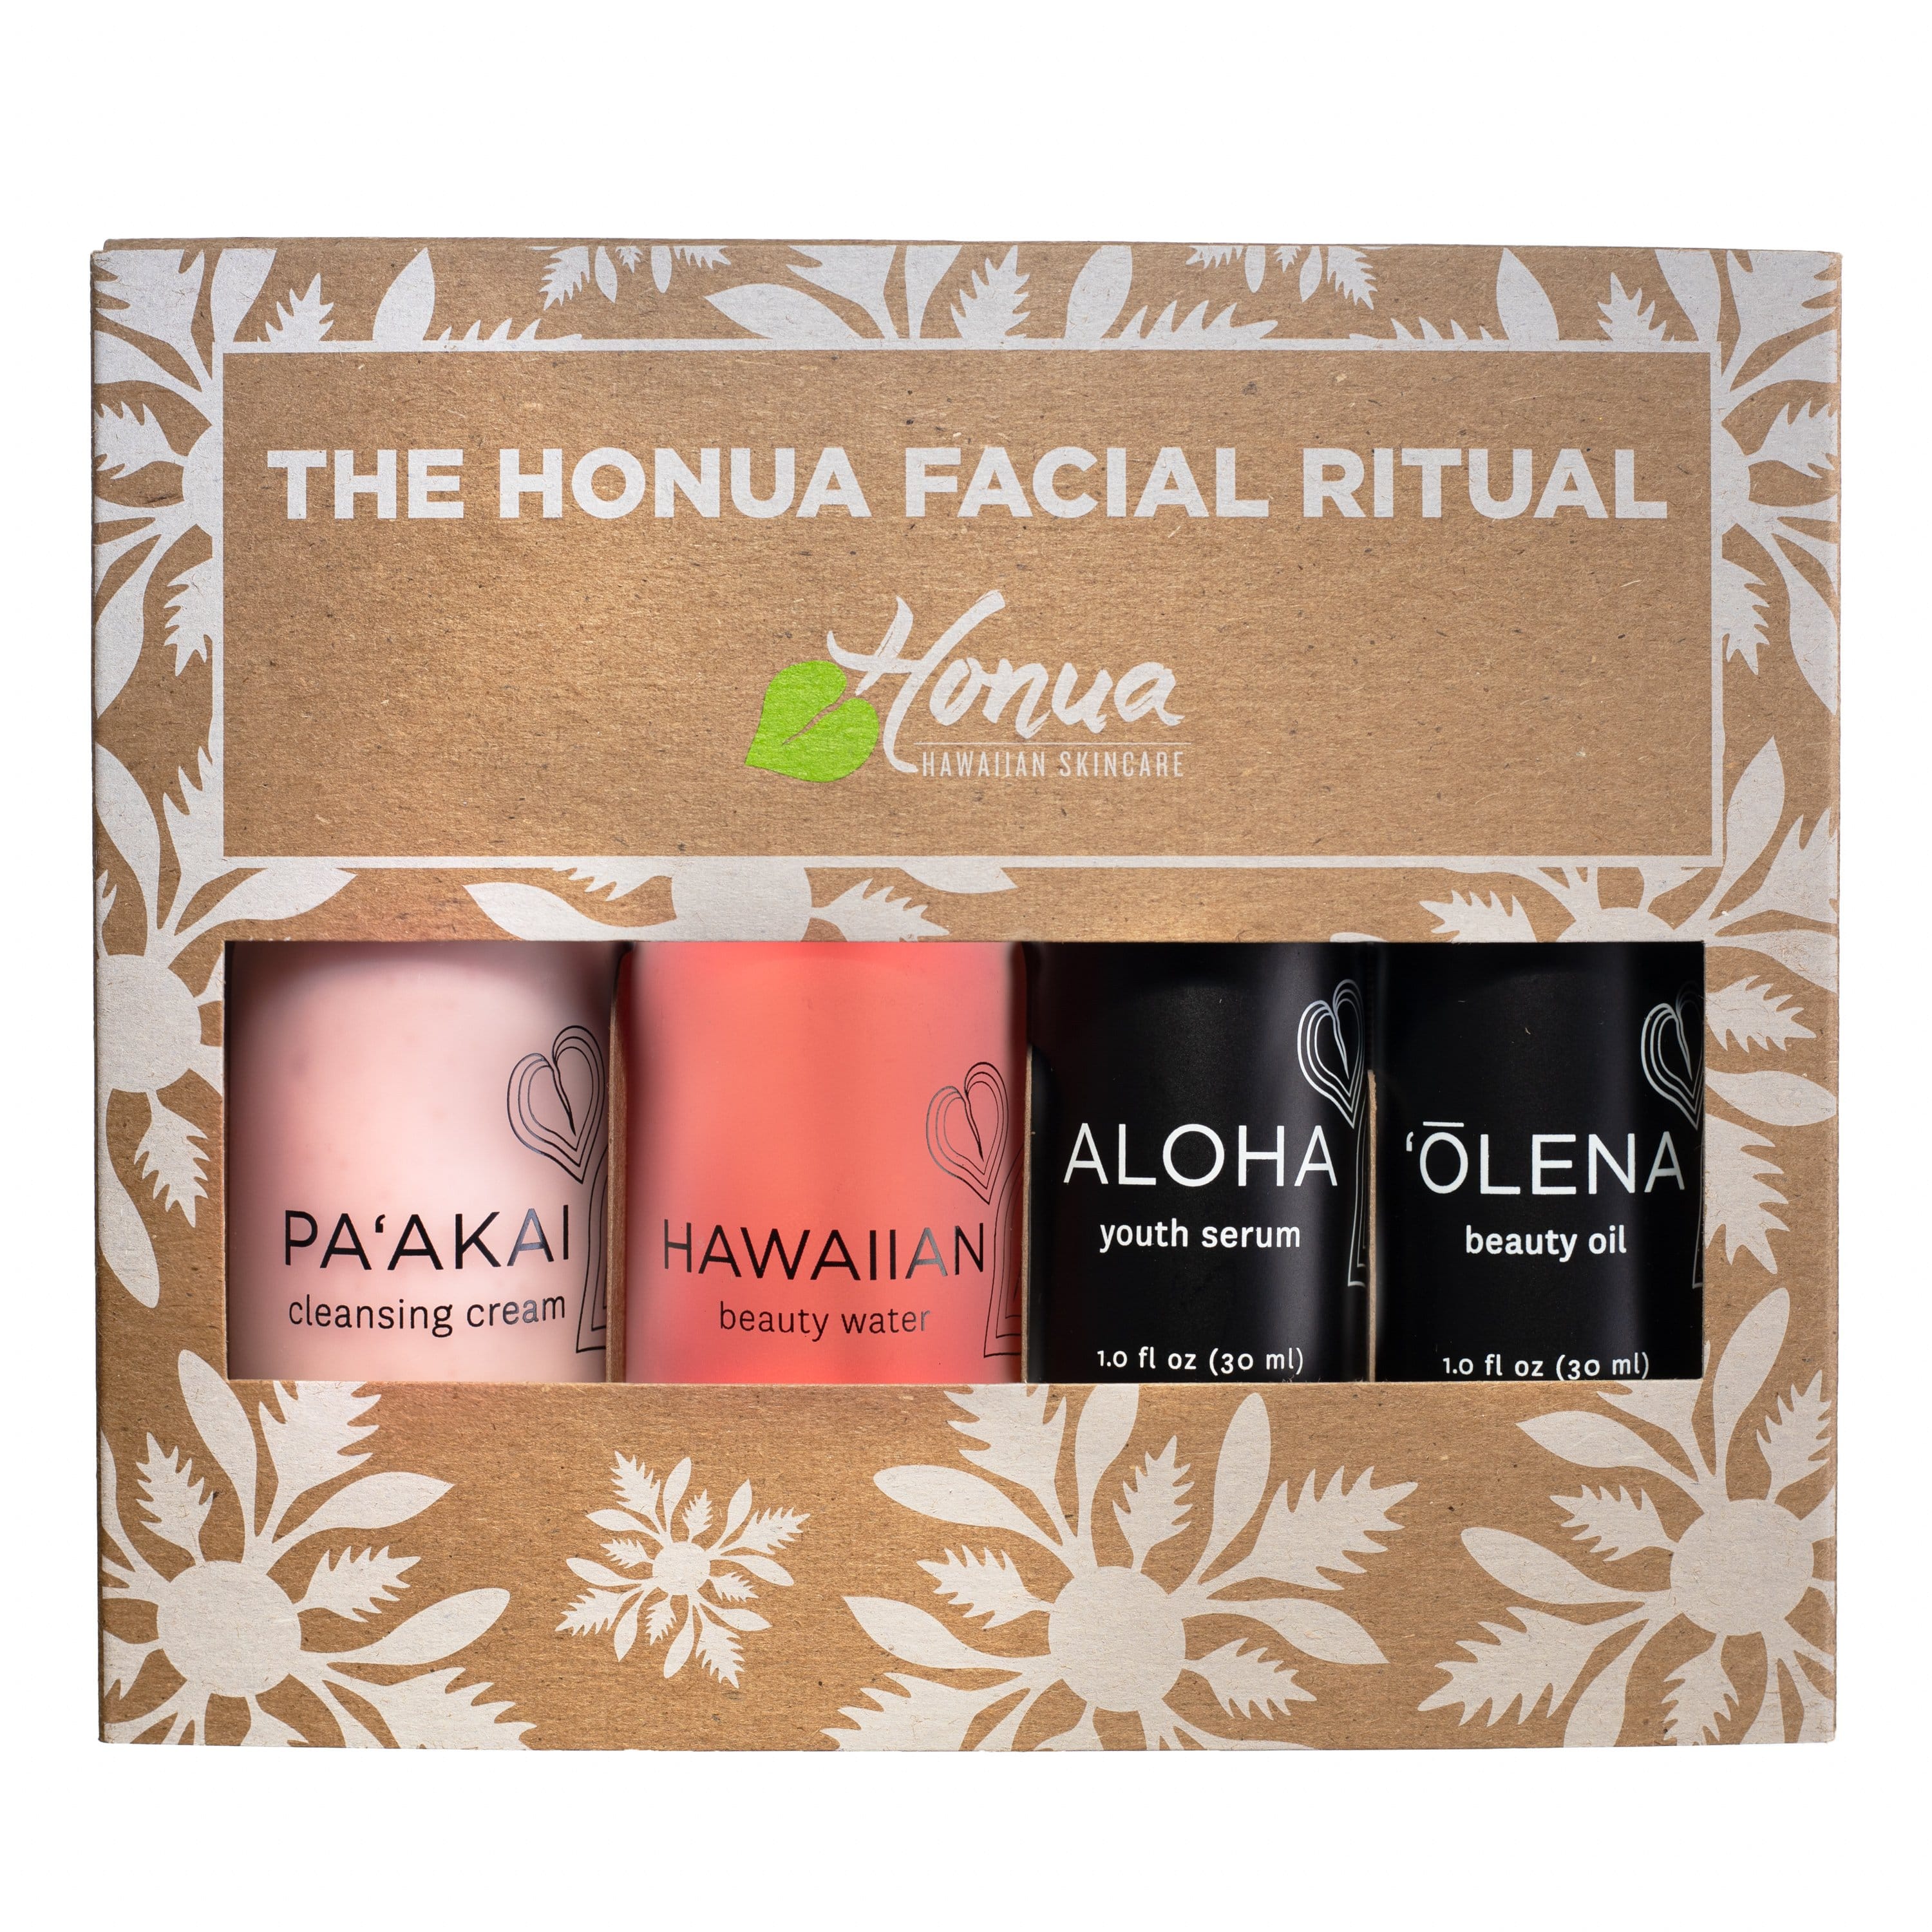 The Honua Facial Ritual Kit - Cleansing Cream, Beauty Water, Youth Serum, Beauty Oil